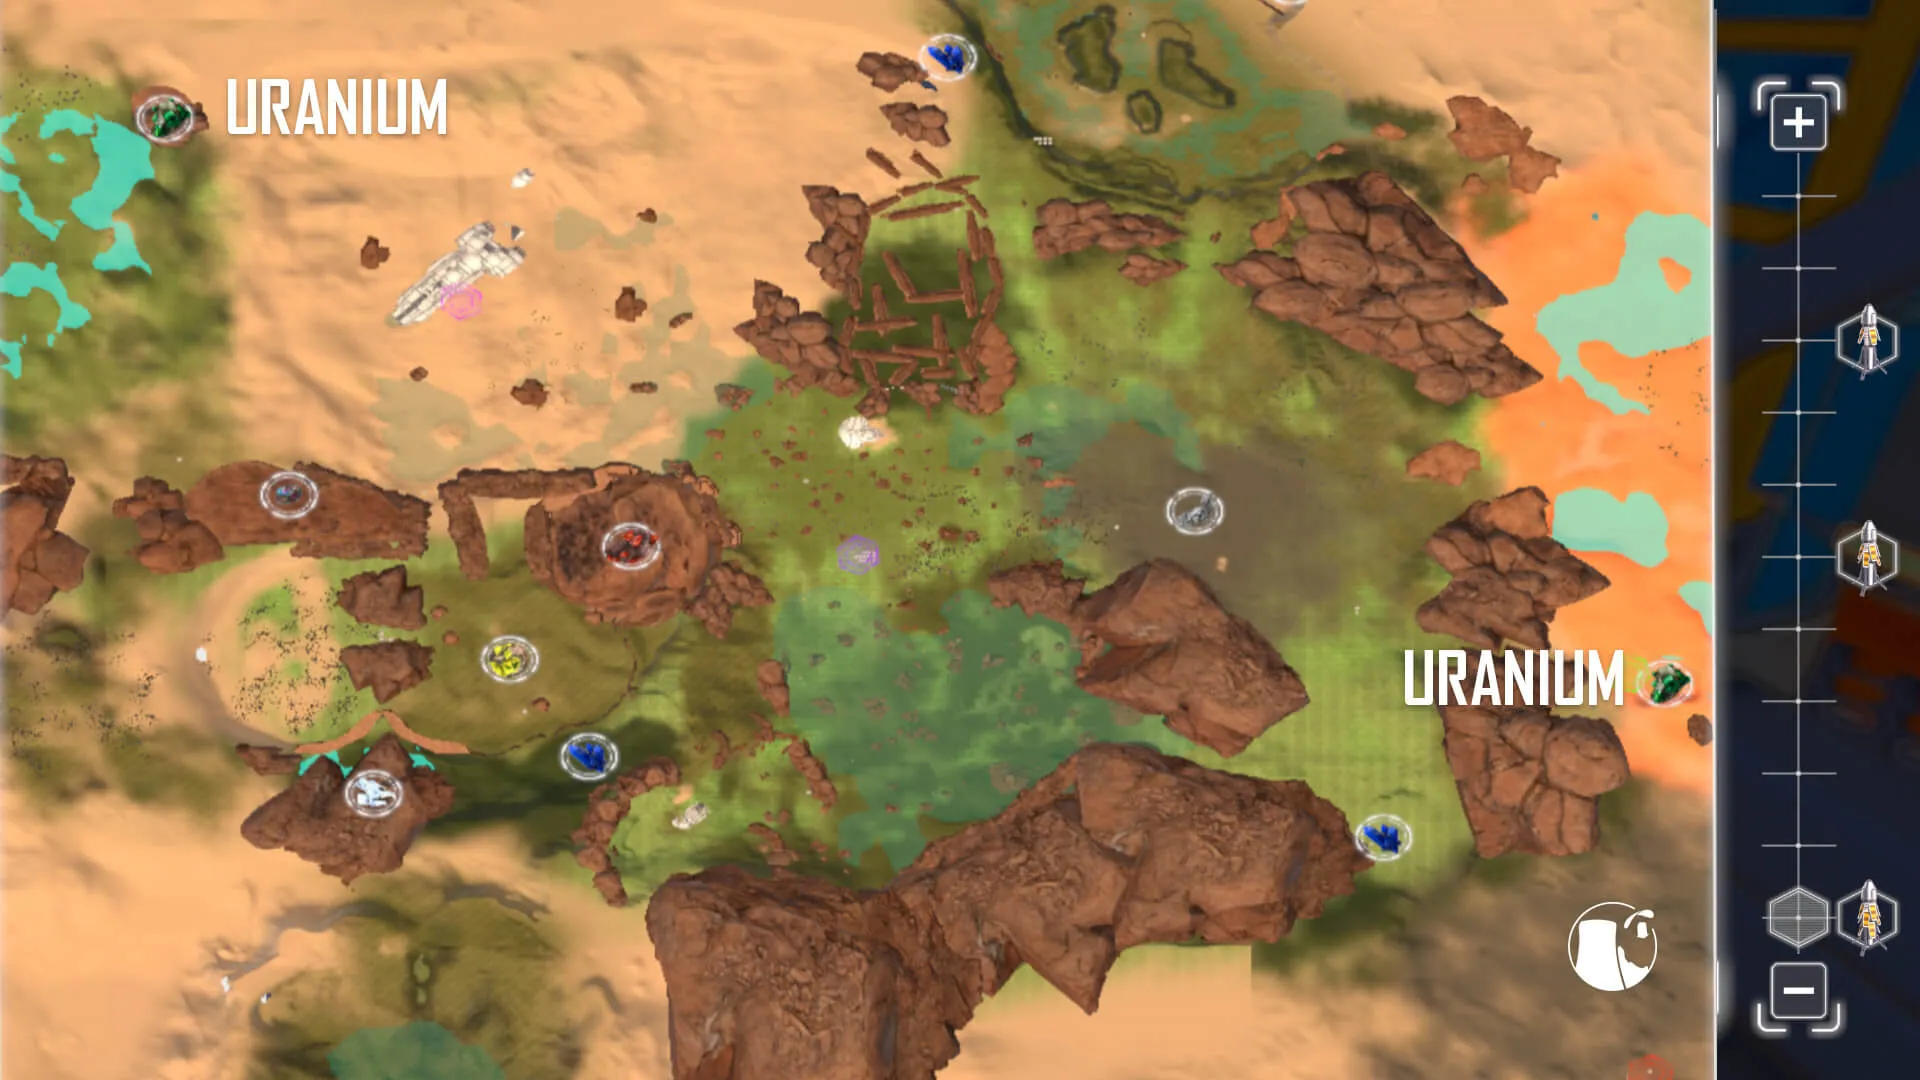 The Planet Crafter Ore Locations Guide - RespawnFirst